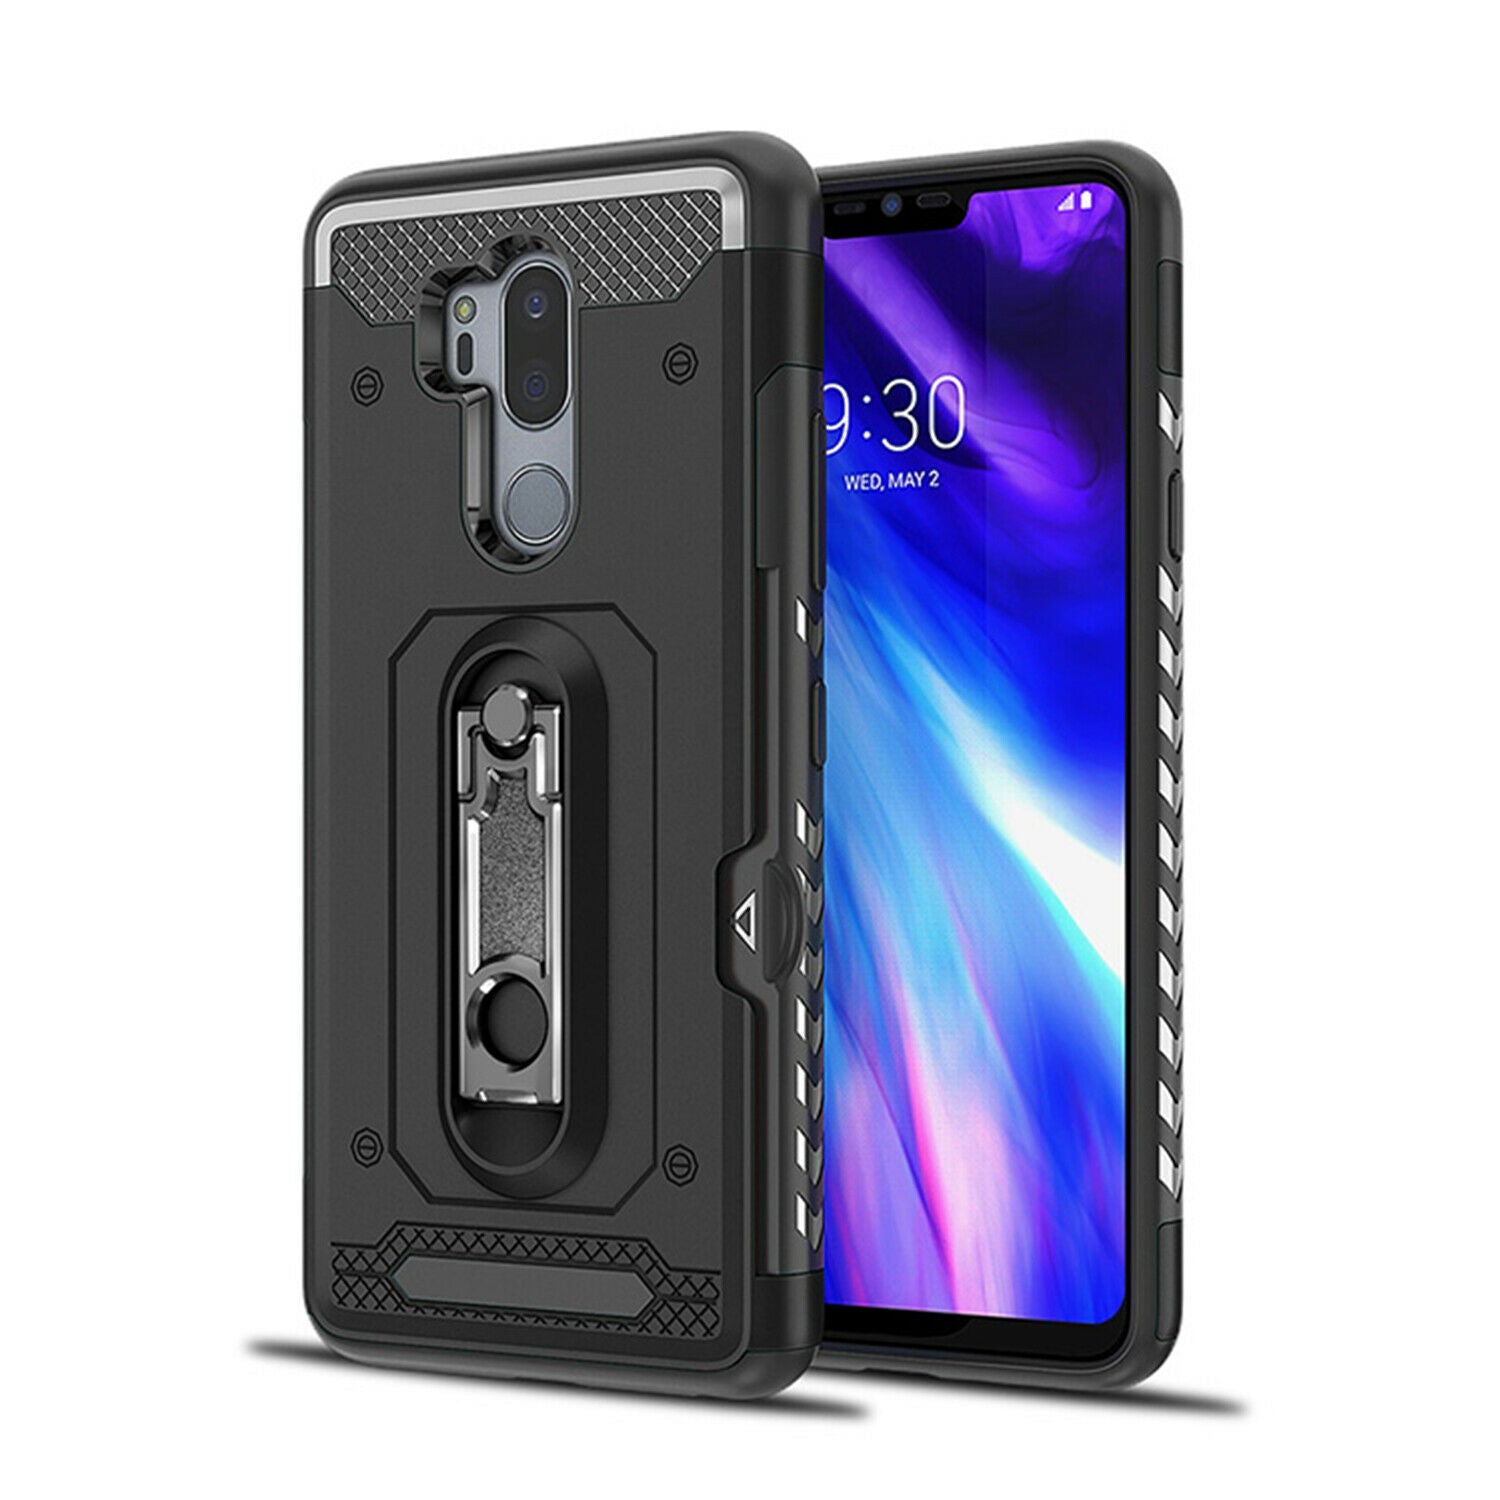 For LG G7 Case Hybrid TPU Heavy Duty Card Slot Stand Shockproof Cover